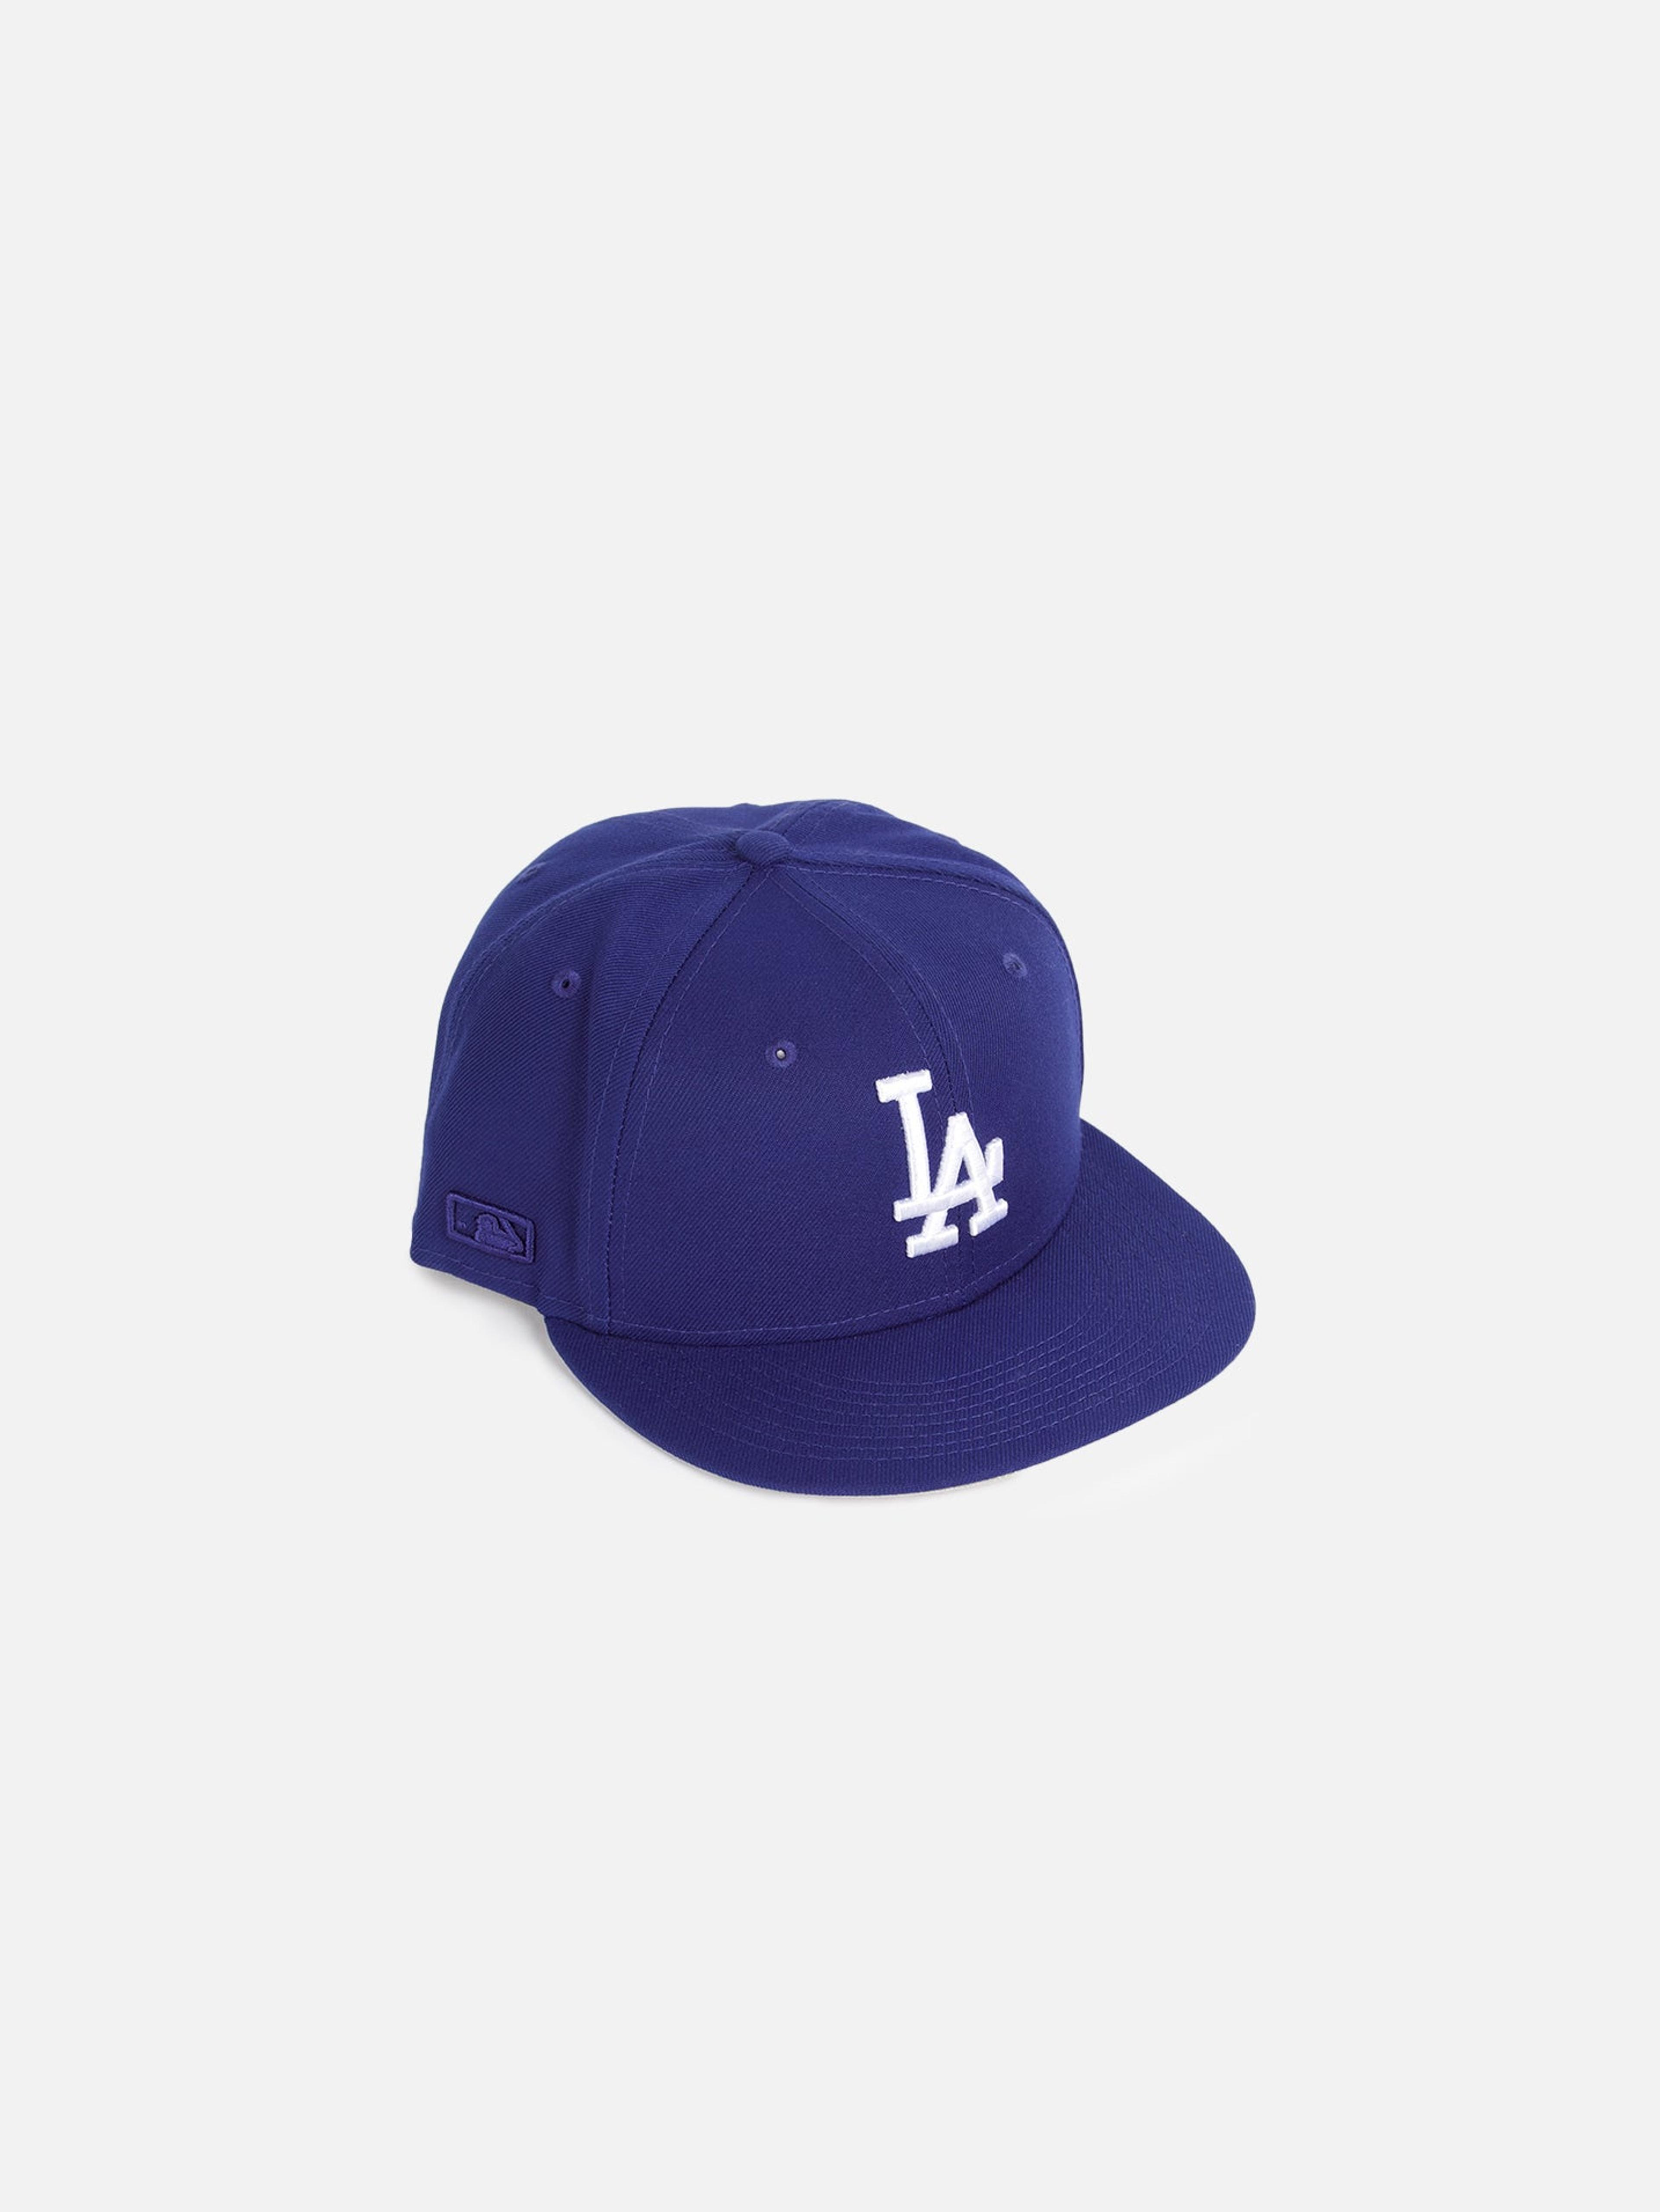 Alternate View 2 of Bricks & Wood x Dodgers New Era Fitted - Royal